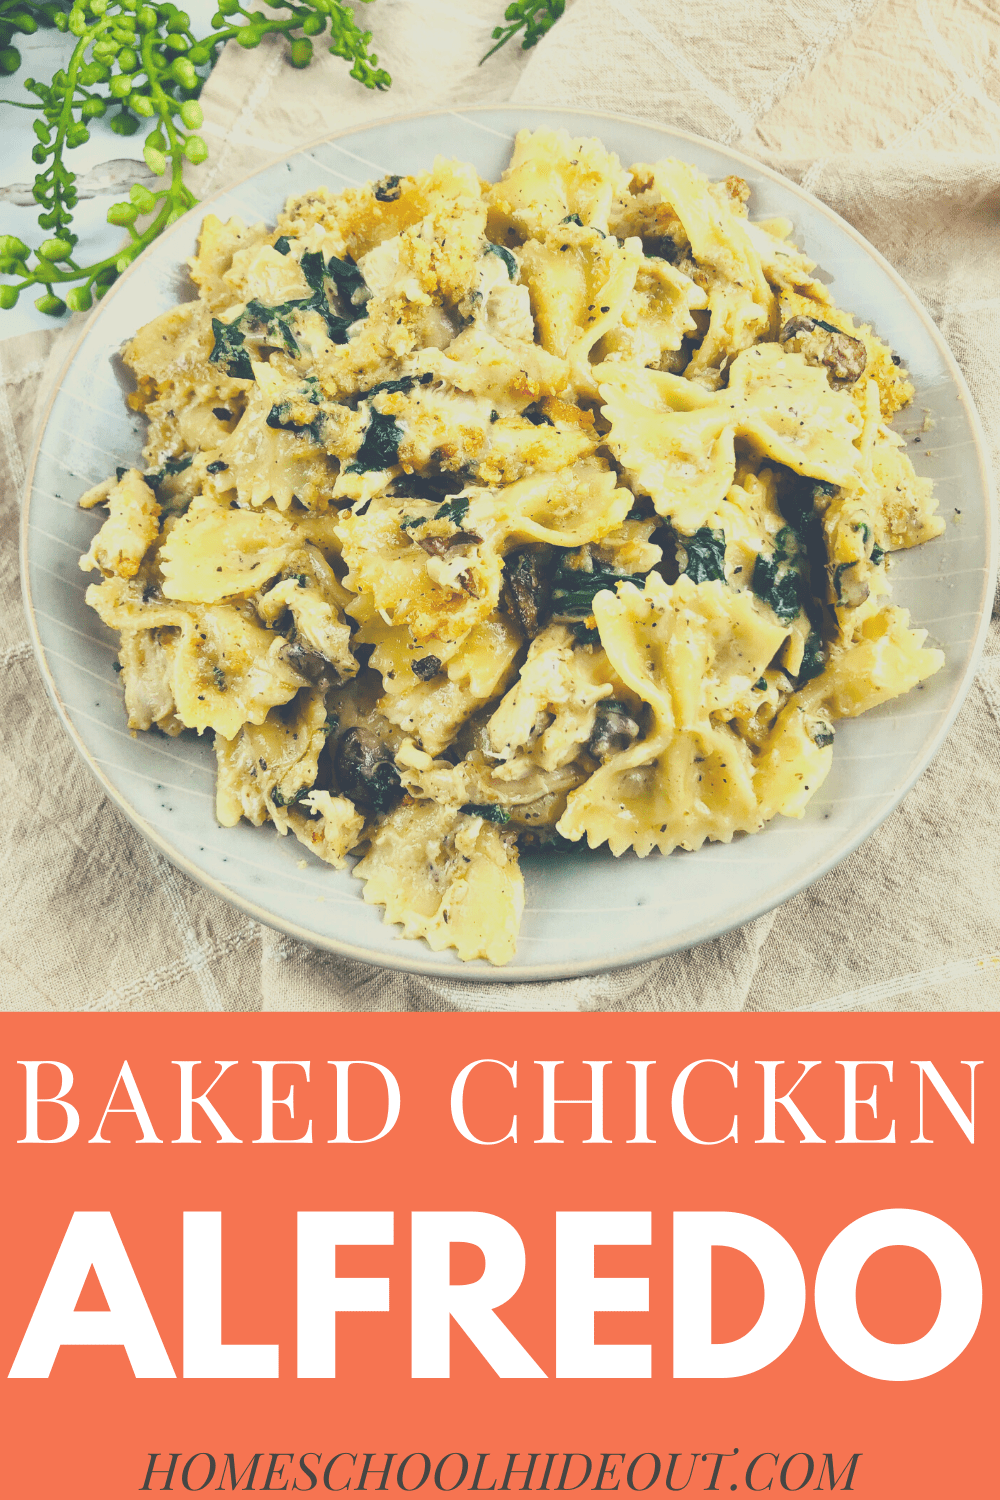 Baked chicken alfredo? YES, PLEASE! I love the simplicity of this recipe and the added spinach and mushrooms is perfect!